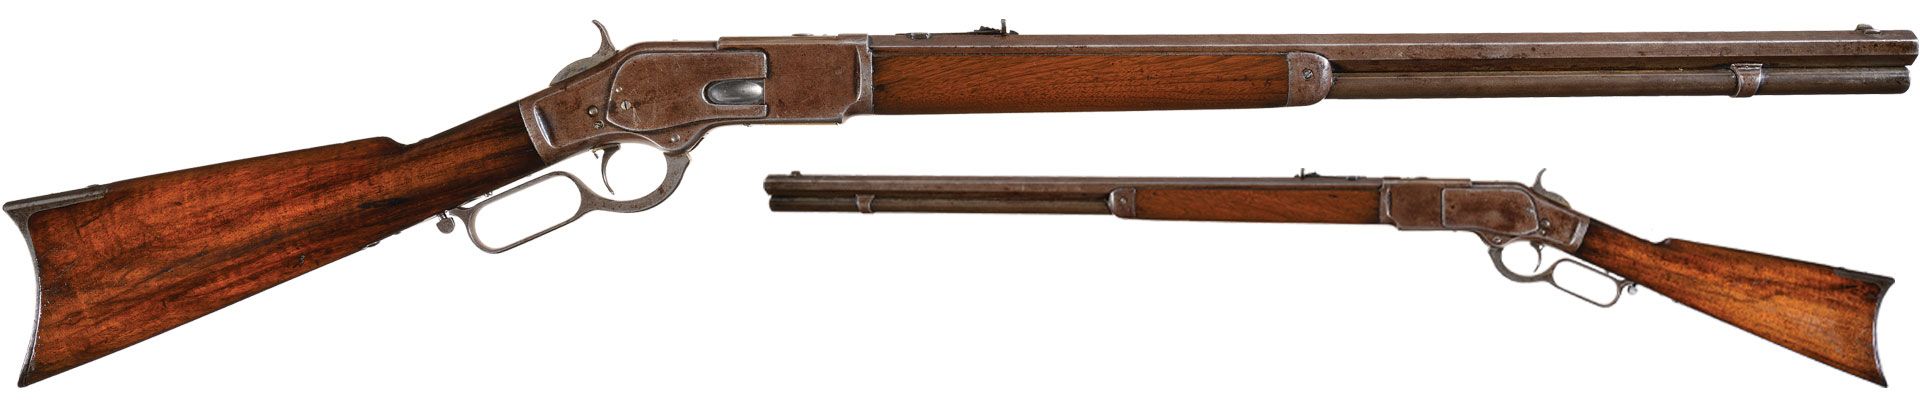 Lot 1042: Winchester First Model 1873 Rifle Serial Number 88